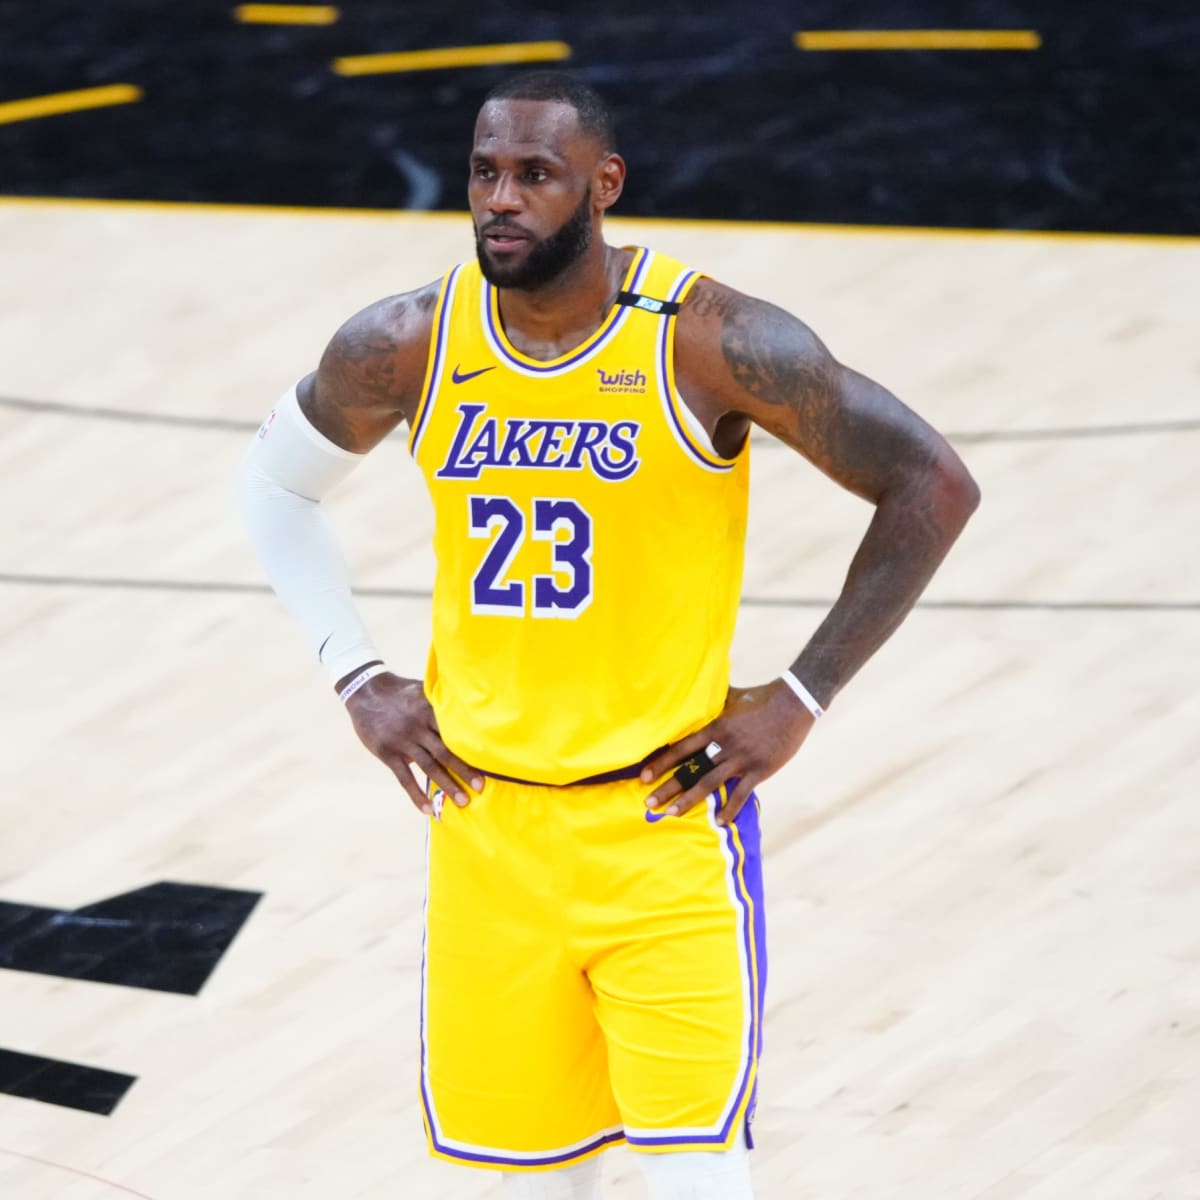 L.A. Lakers' LeBron James changing his jersey number - again